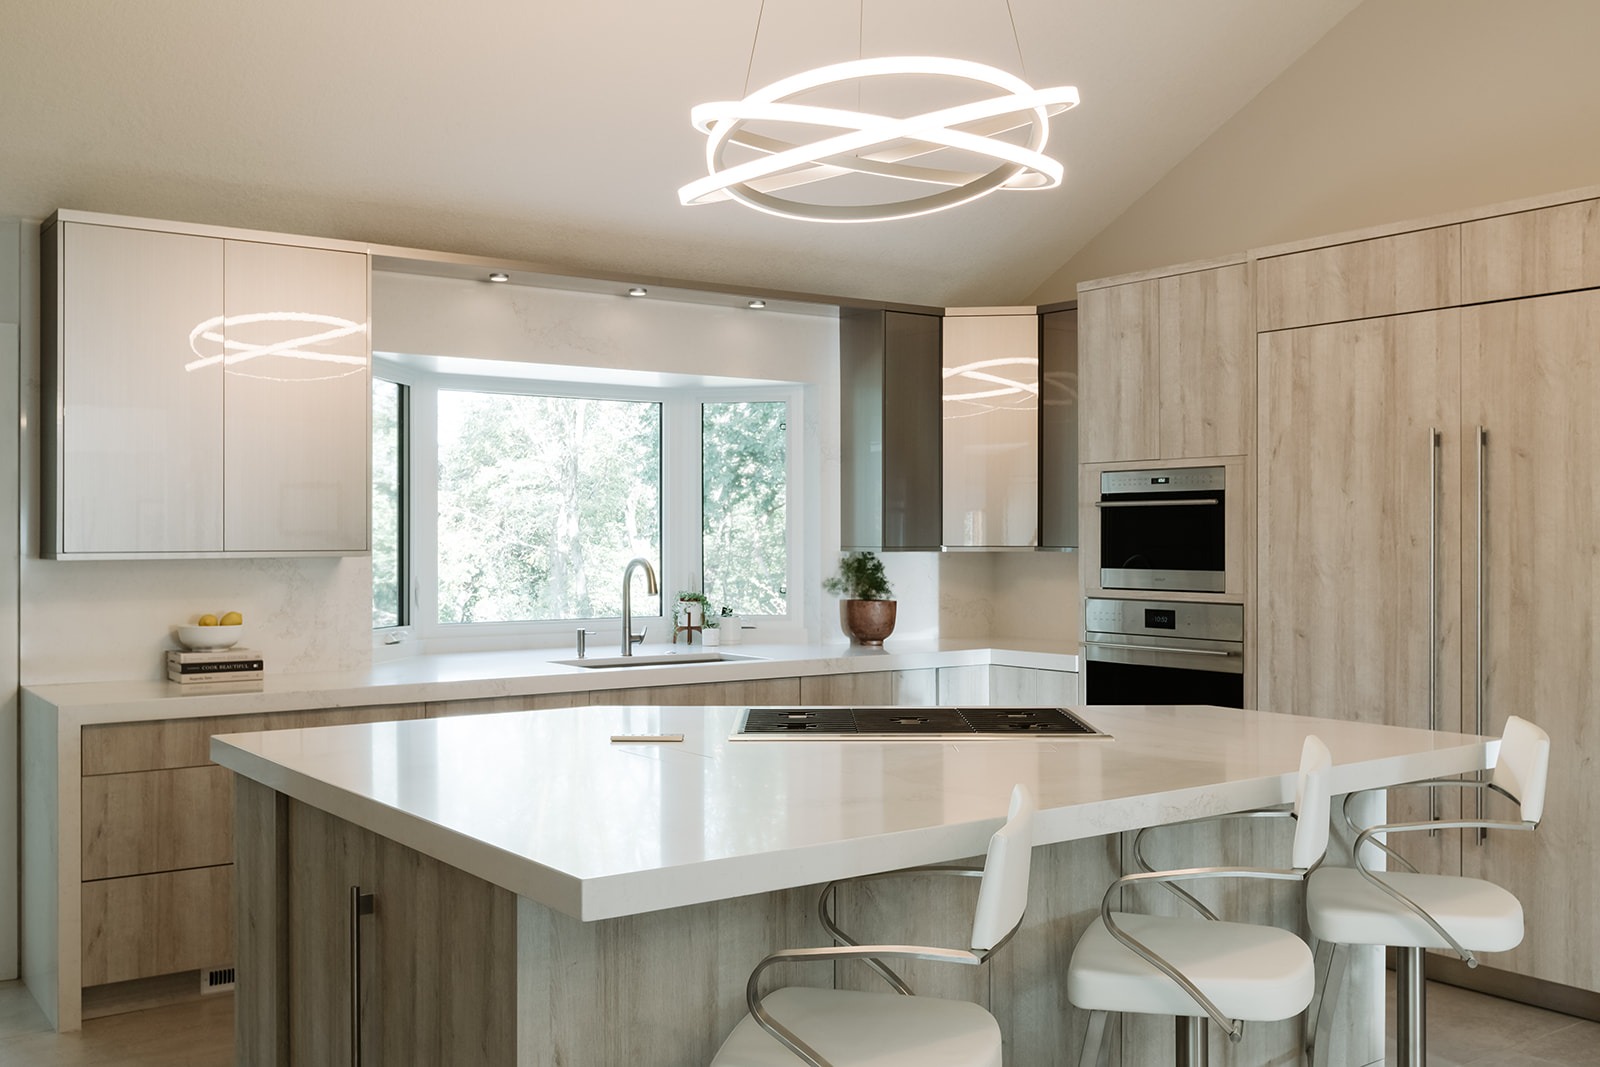 Light and Breezy Kitchen